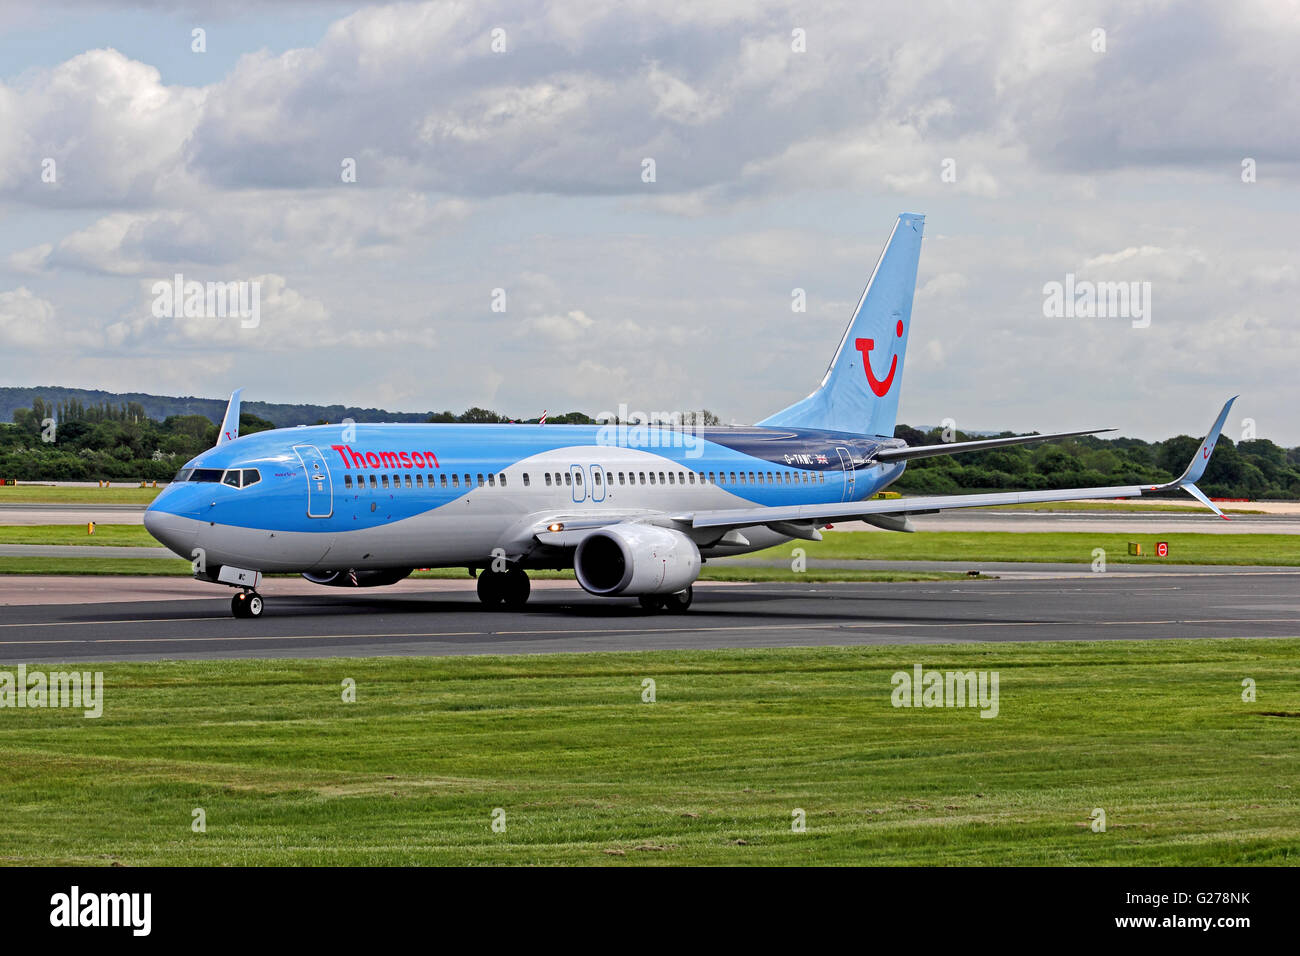 Thomson Airlines Boeing 737-3 airliner taxiing at Manchester International Airport. Stock Photo